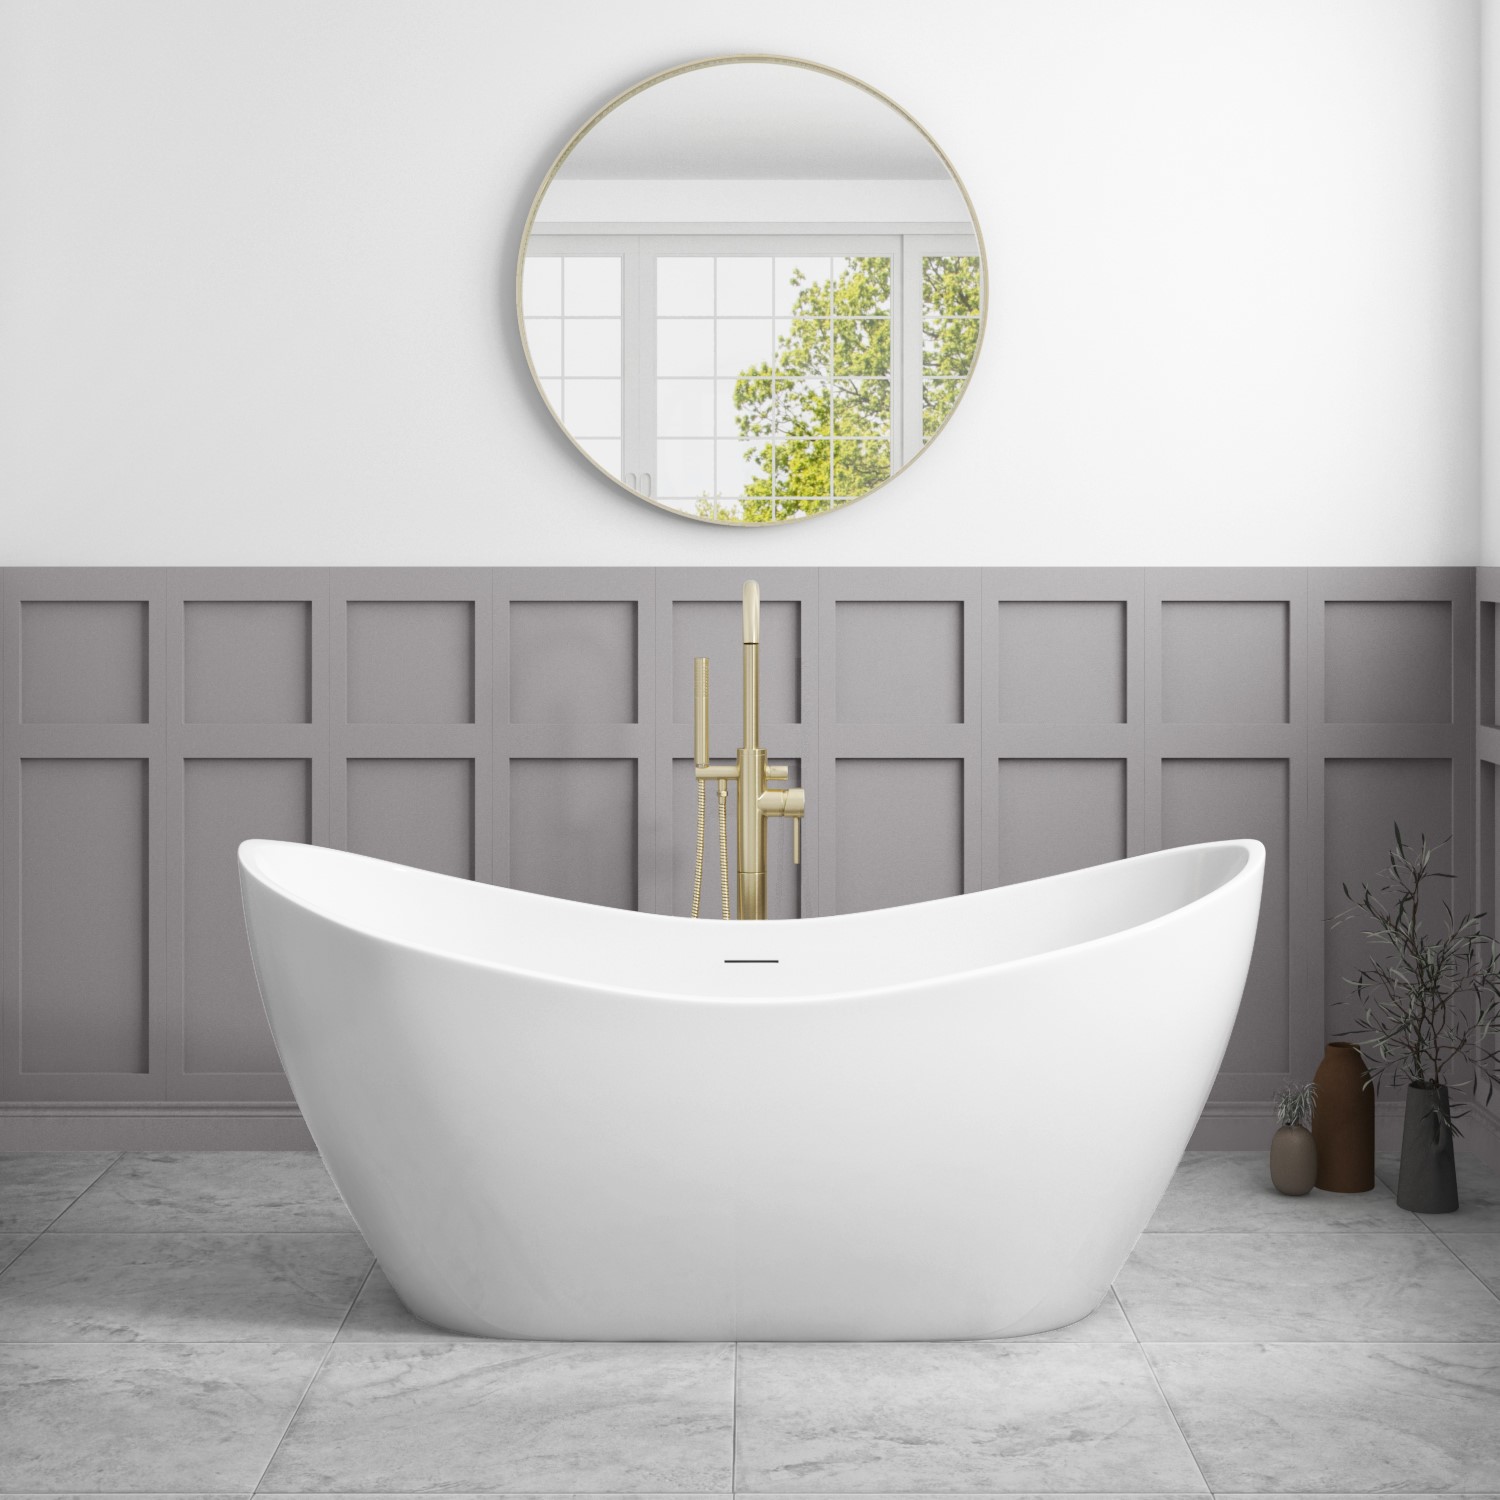 Kensington 1550mm x 720mm Single Ended Freestanding Slipper Roll Top Bath  with Chrome Claw Feet - Wholesale Domestic